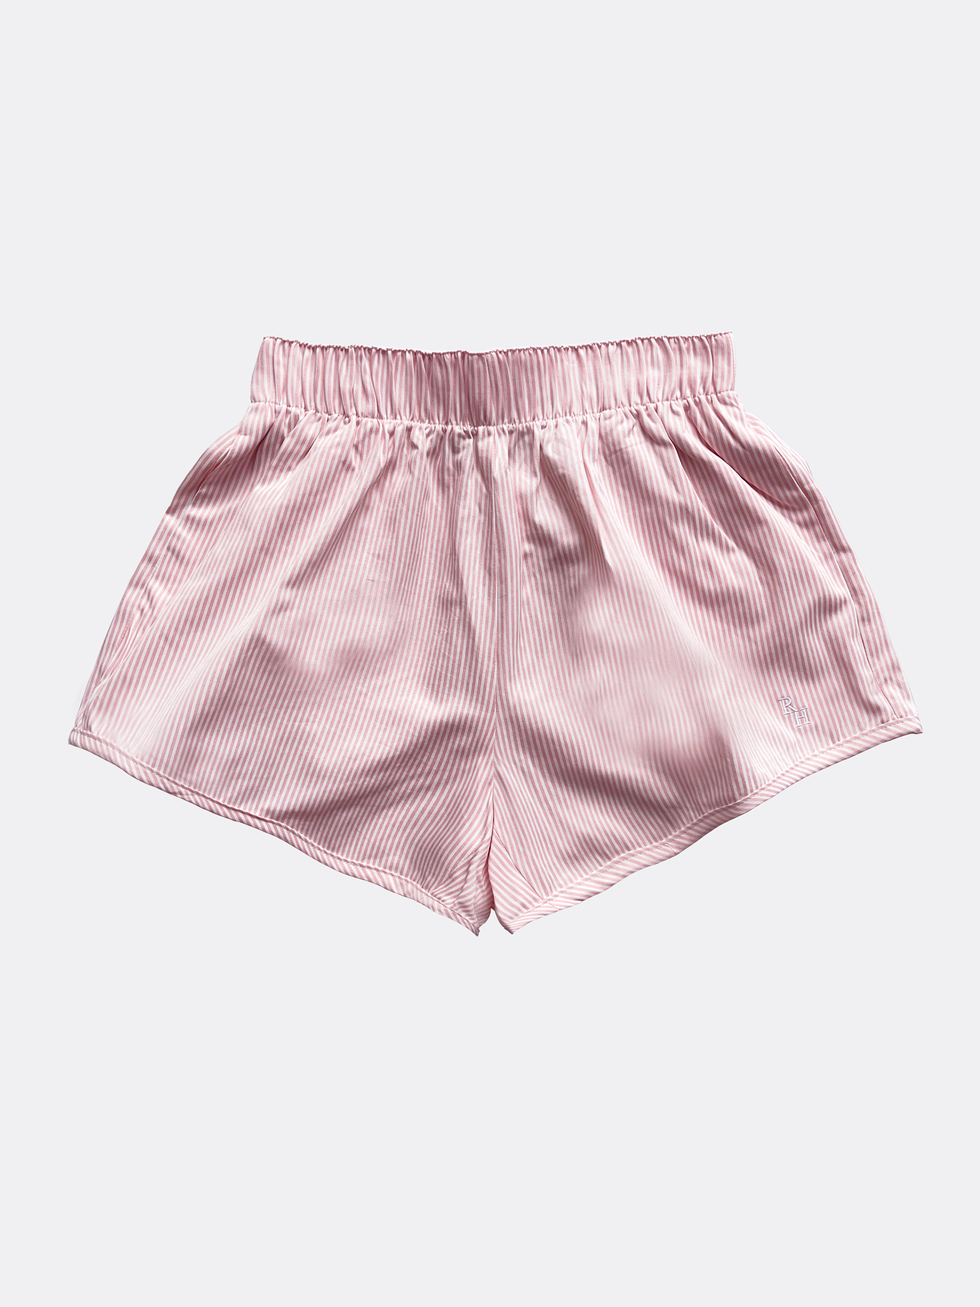 The Ferry Short Pink